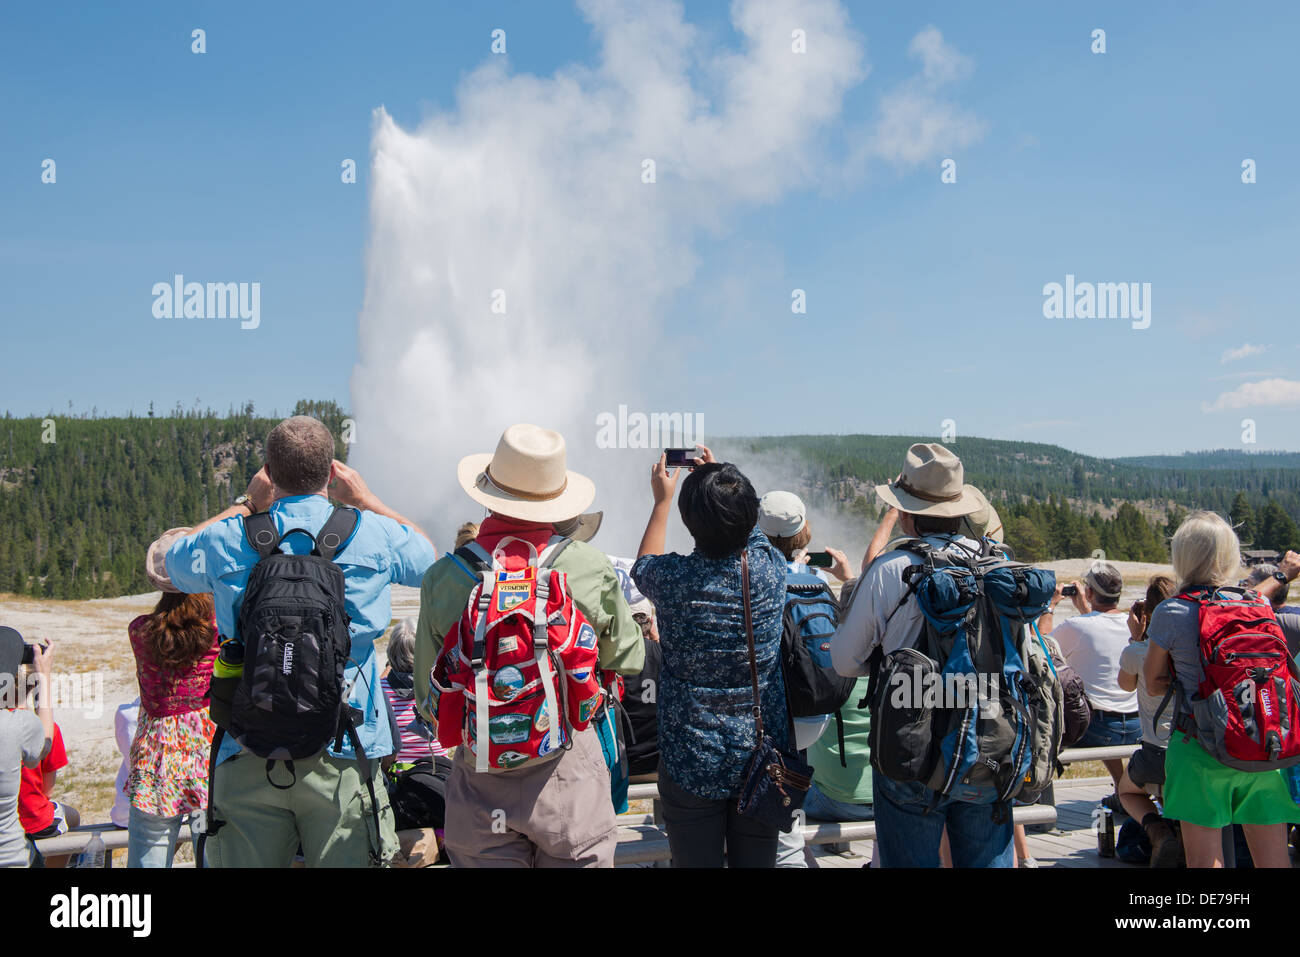 Photograph of a group of people enjoying an eruption of Yellowstone's Old Faithful Geyser. Stock Photo